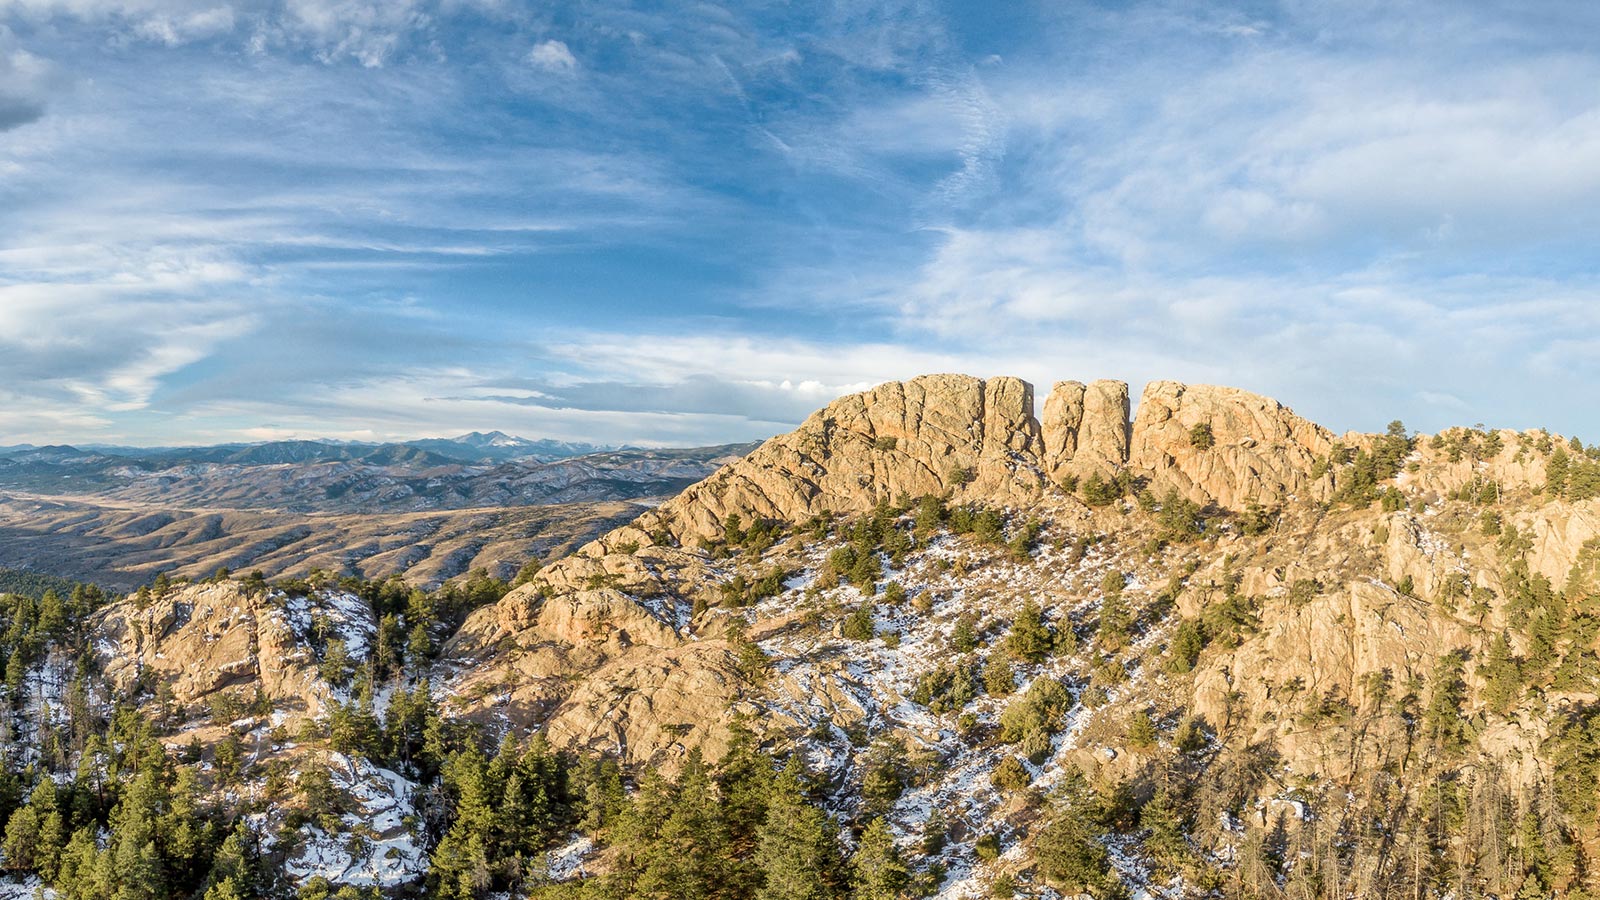 Landscape view of Horsetooth Mountain in Larimer County CO with a blue sky